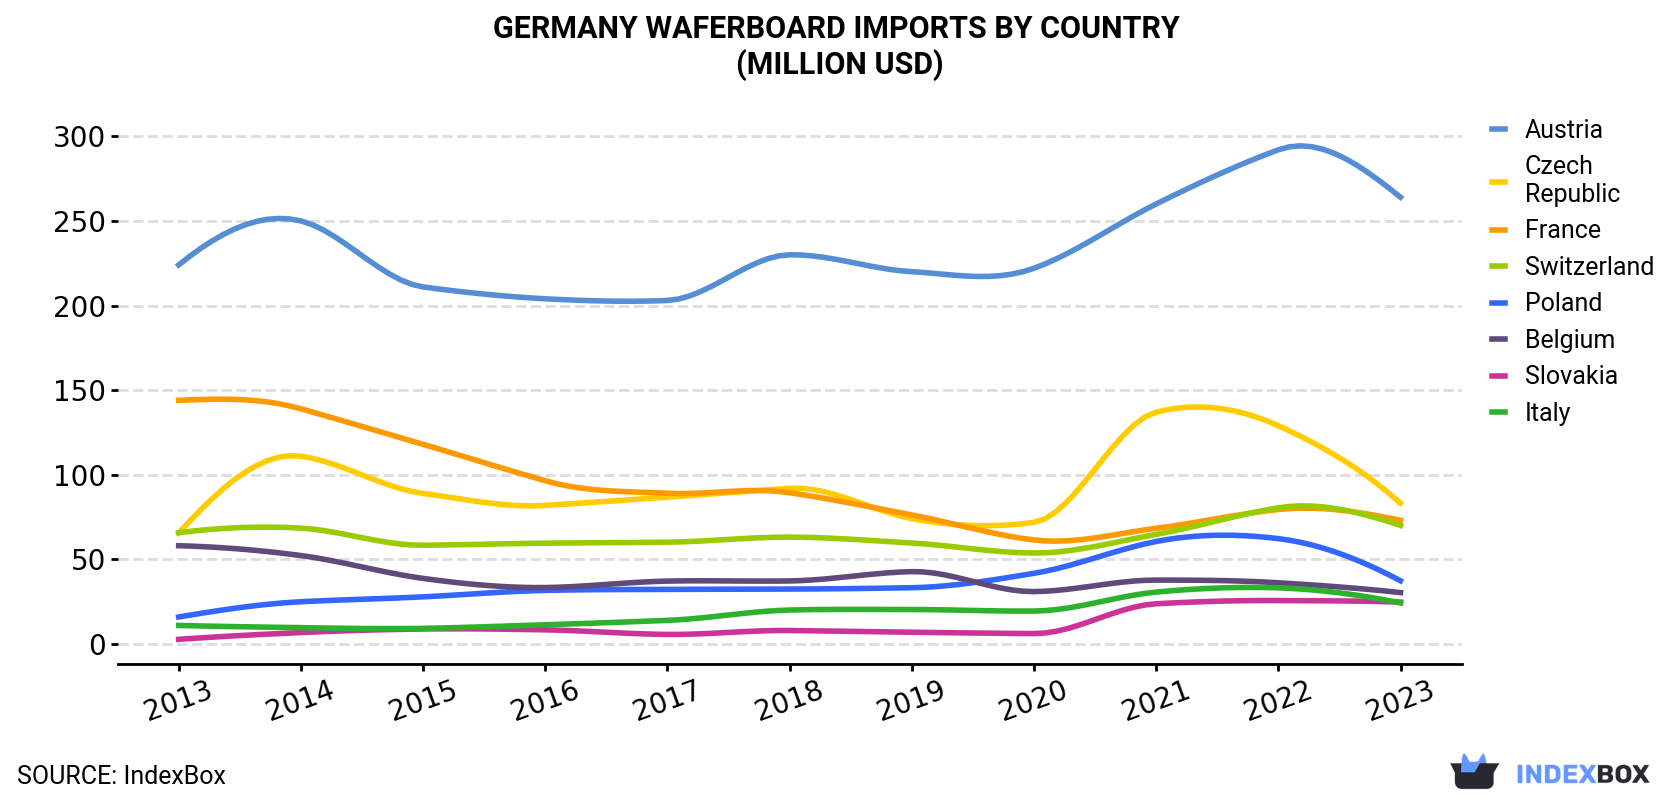 Germany Waferboard Imports By Country (Million USD)